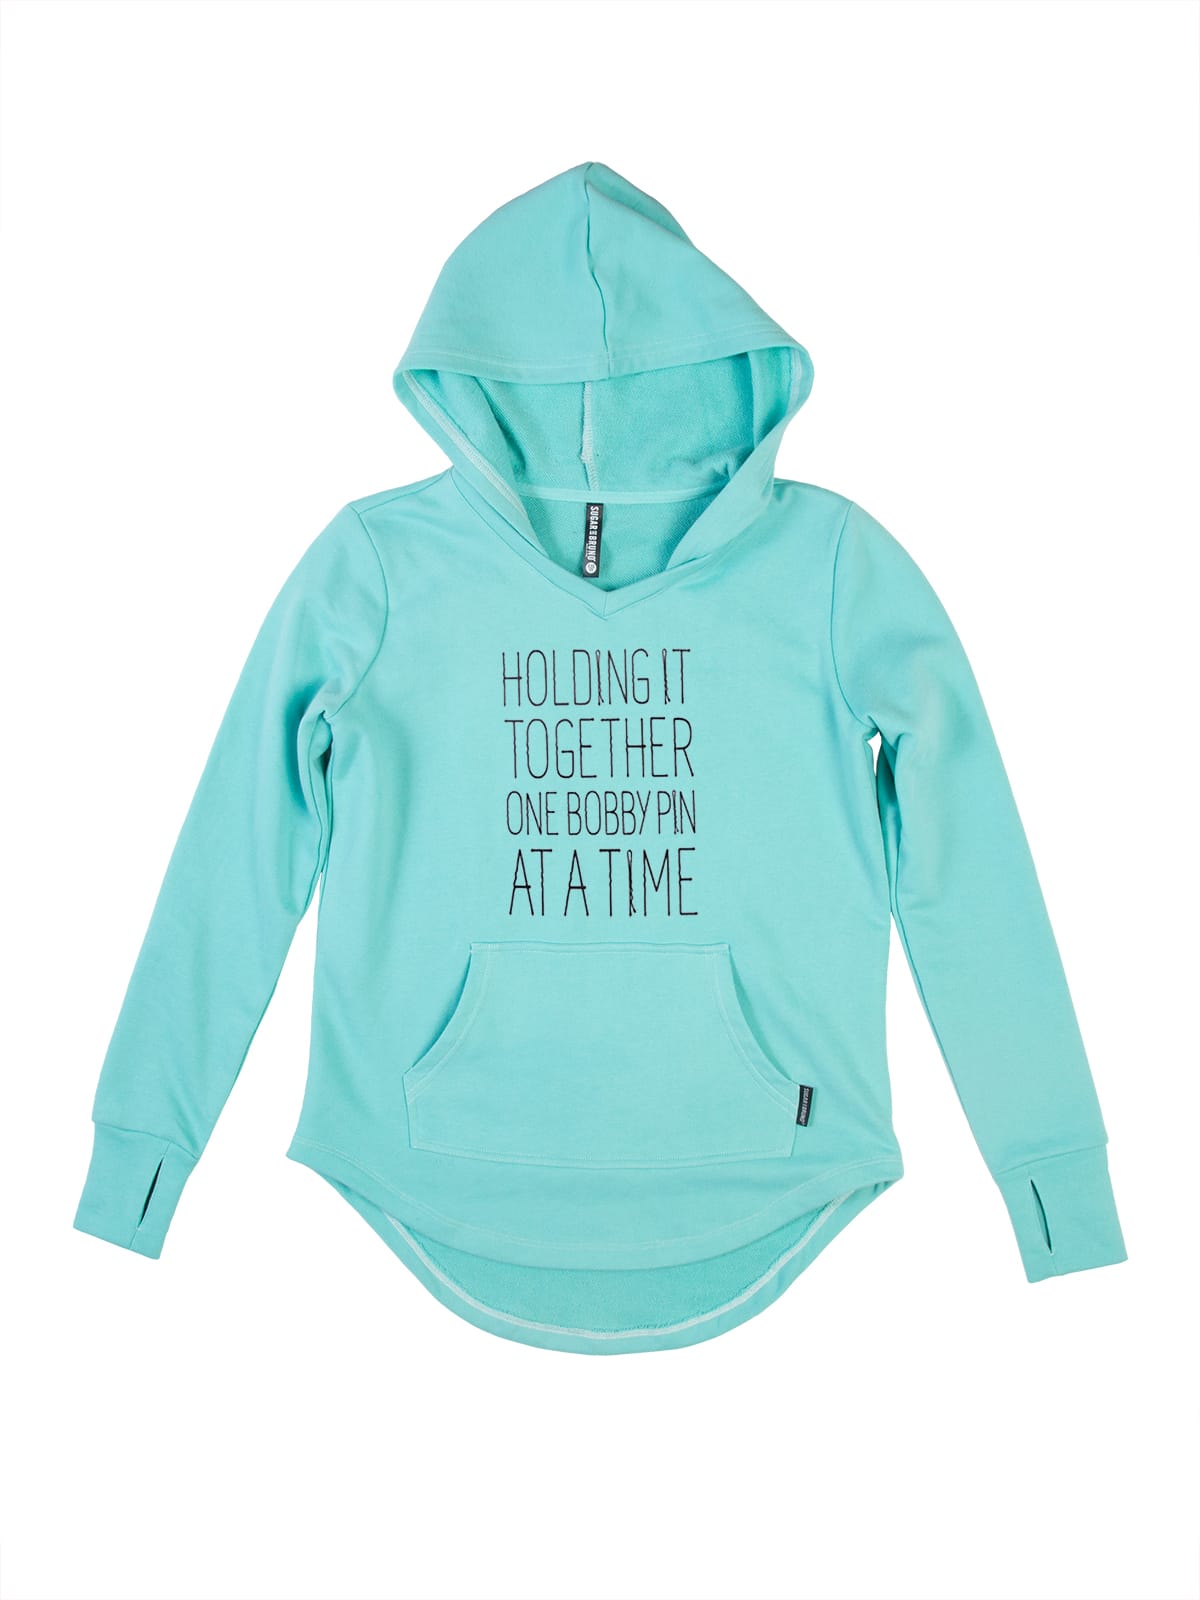 Holding It Youth 365 French Terry Hoodie, Aqua